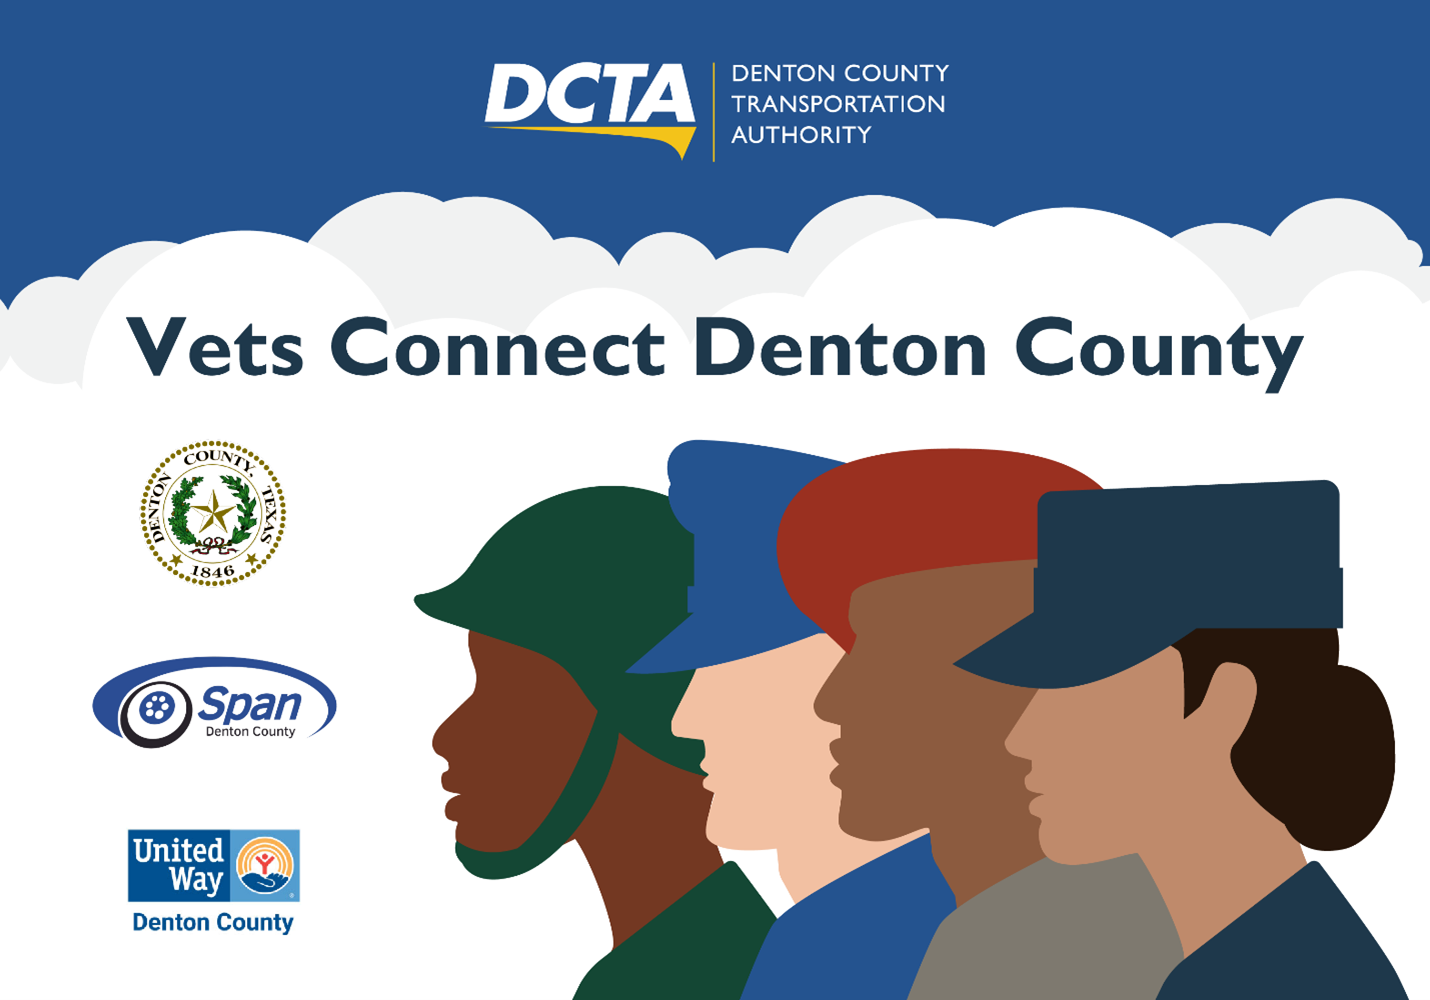 Transportation Resources for Veterans in Denton County